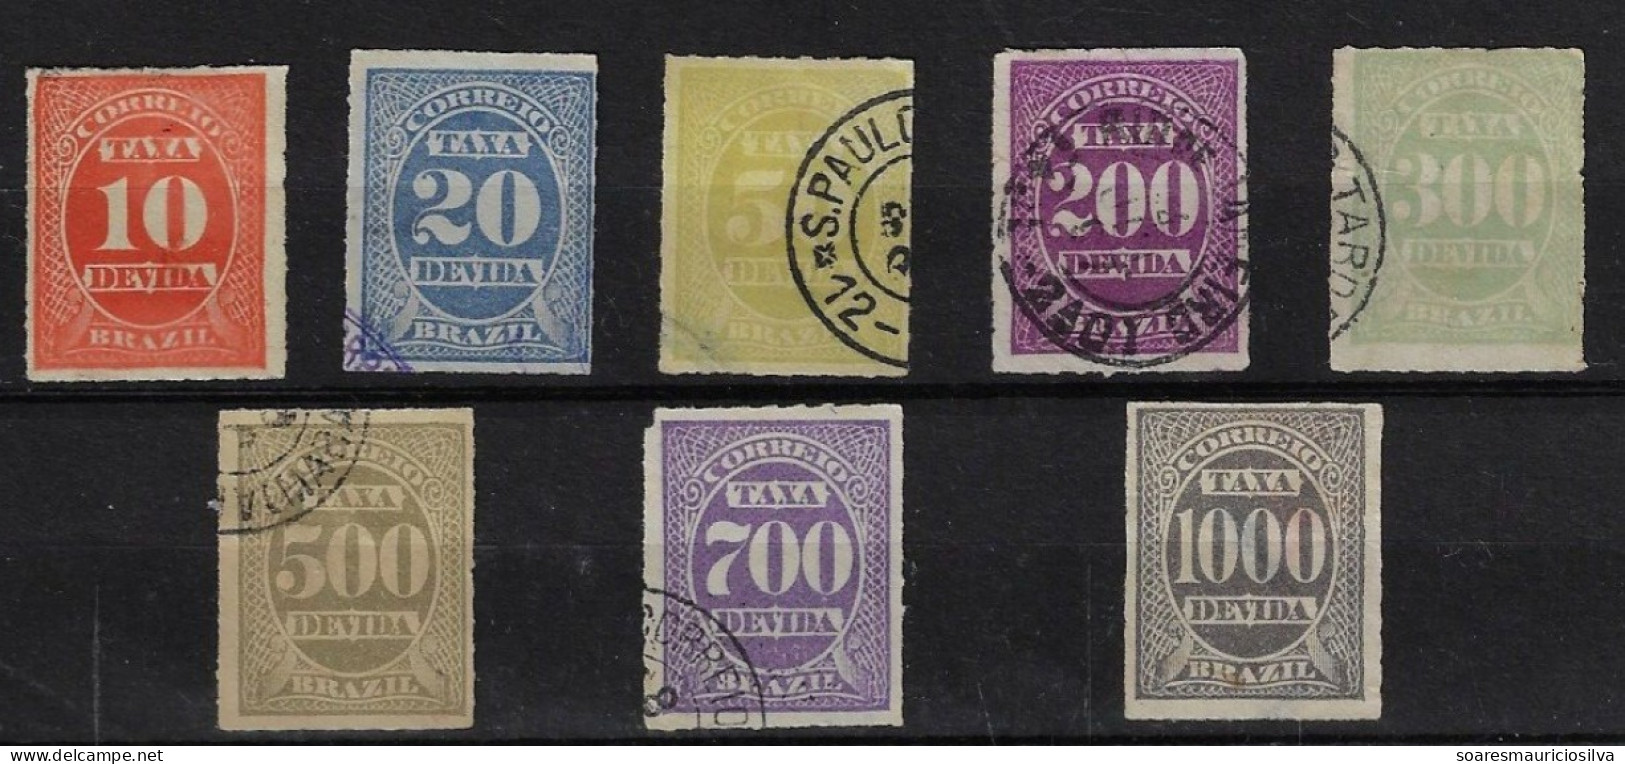 Brazil 1890 Complete Series Postage Due American Bank Note Colors Used & Unused Ink Used In These Stamps Fades In Water - Portomarken